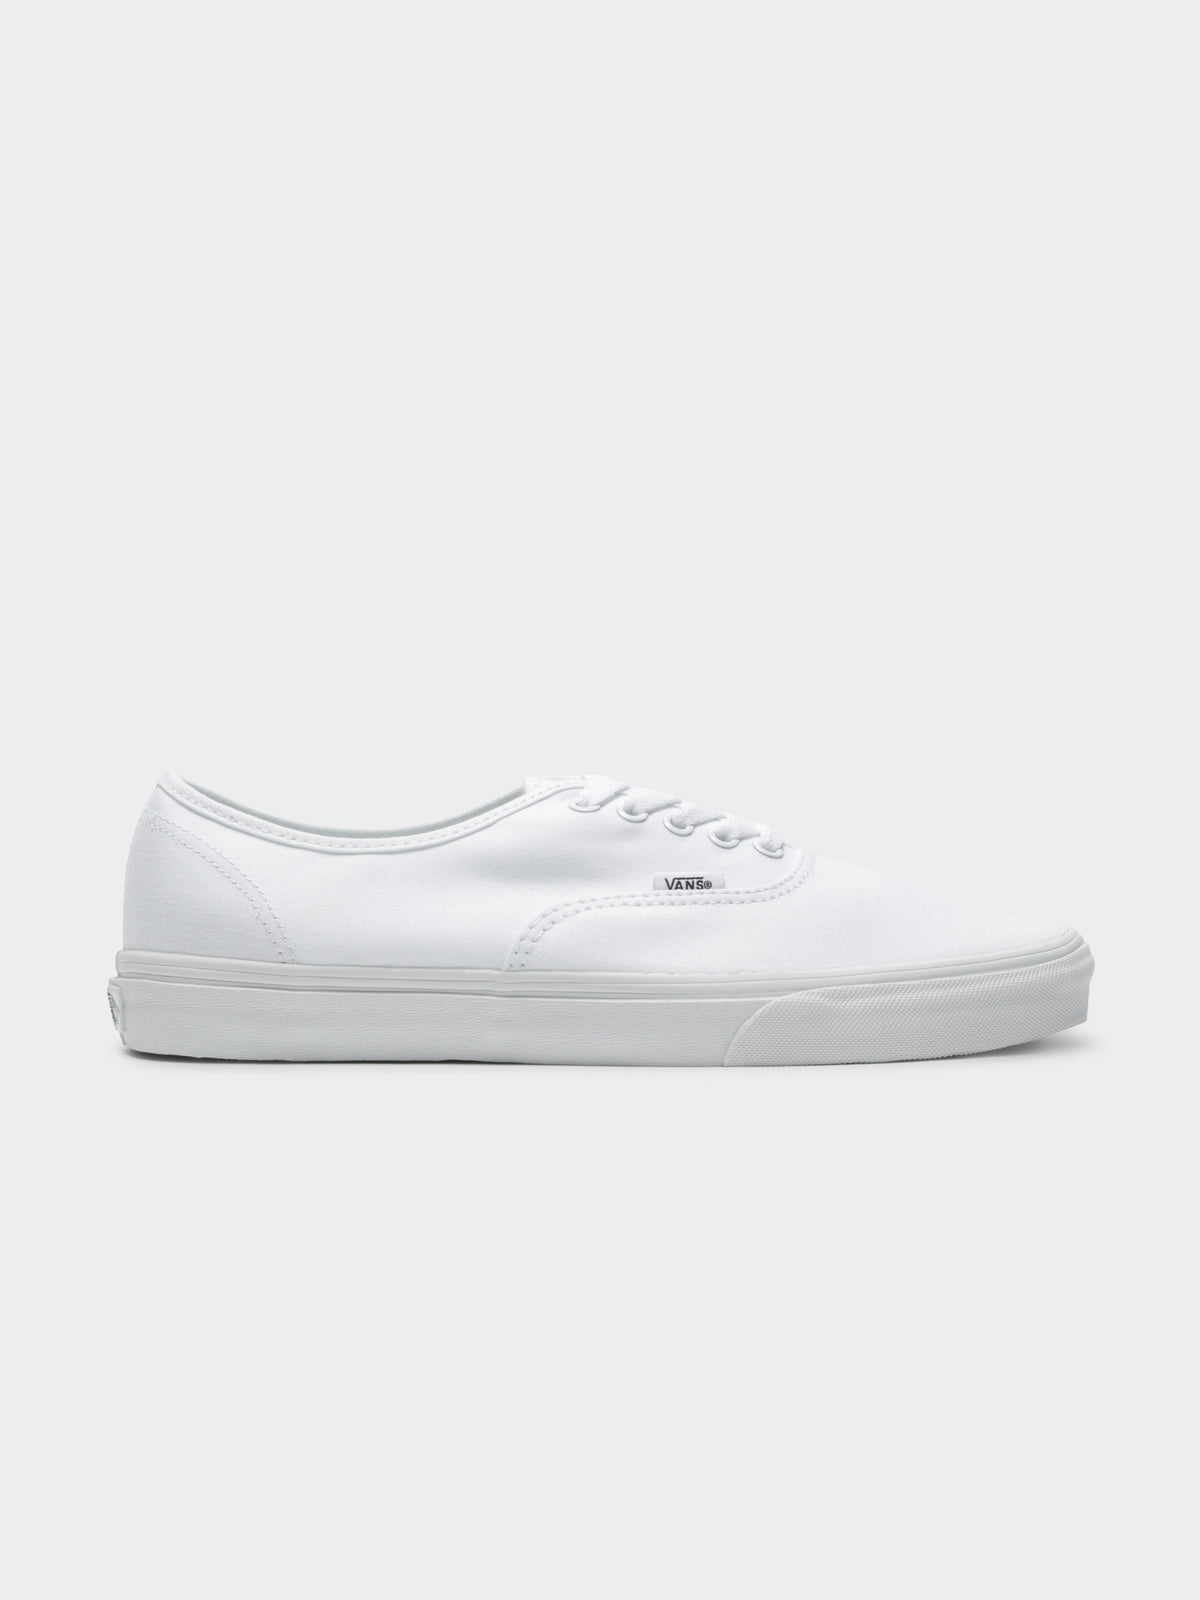 Unisex Authentic Sneakers in White